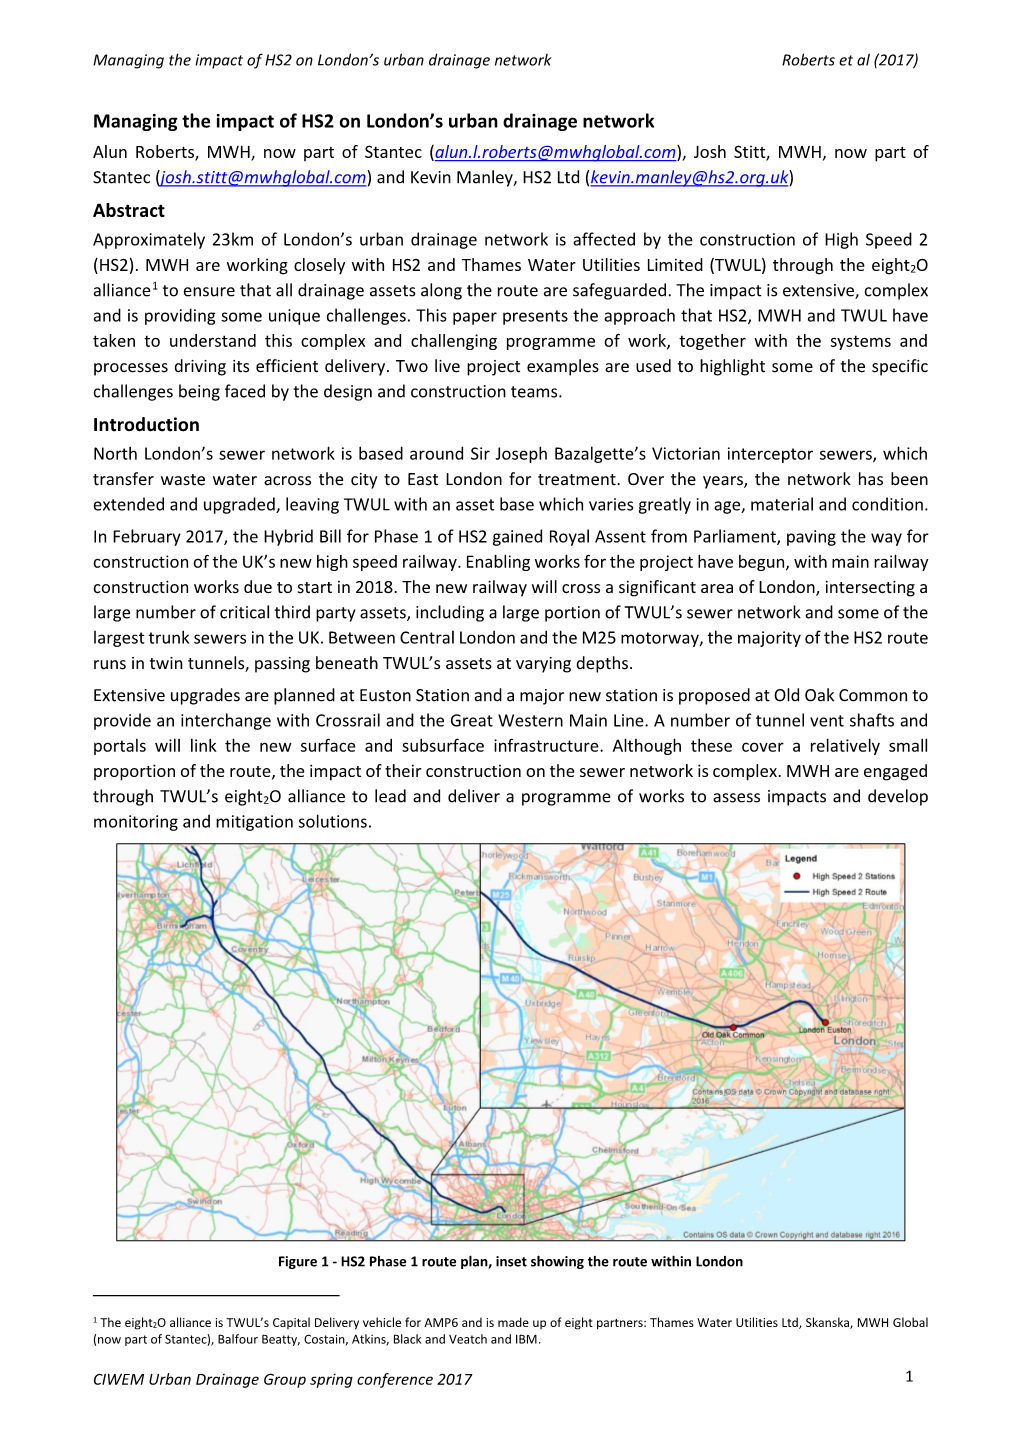 Paper 4 Managing the Impact of HS2 on London's Urban Drainage Network